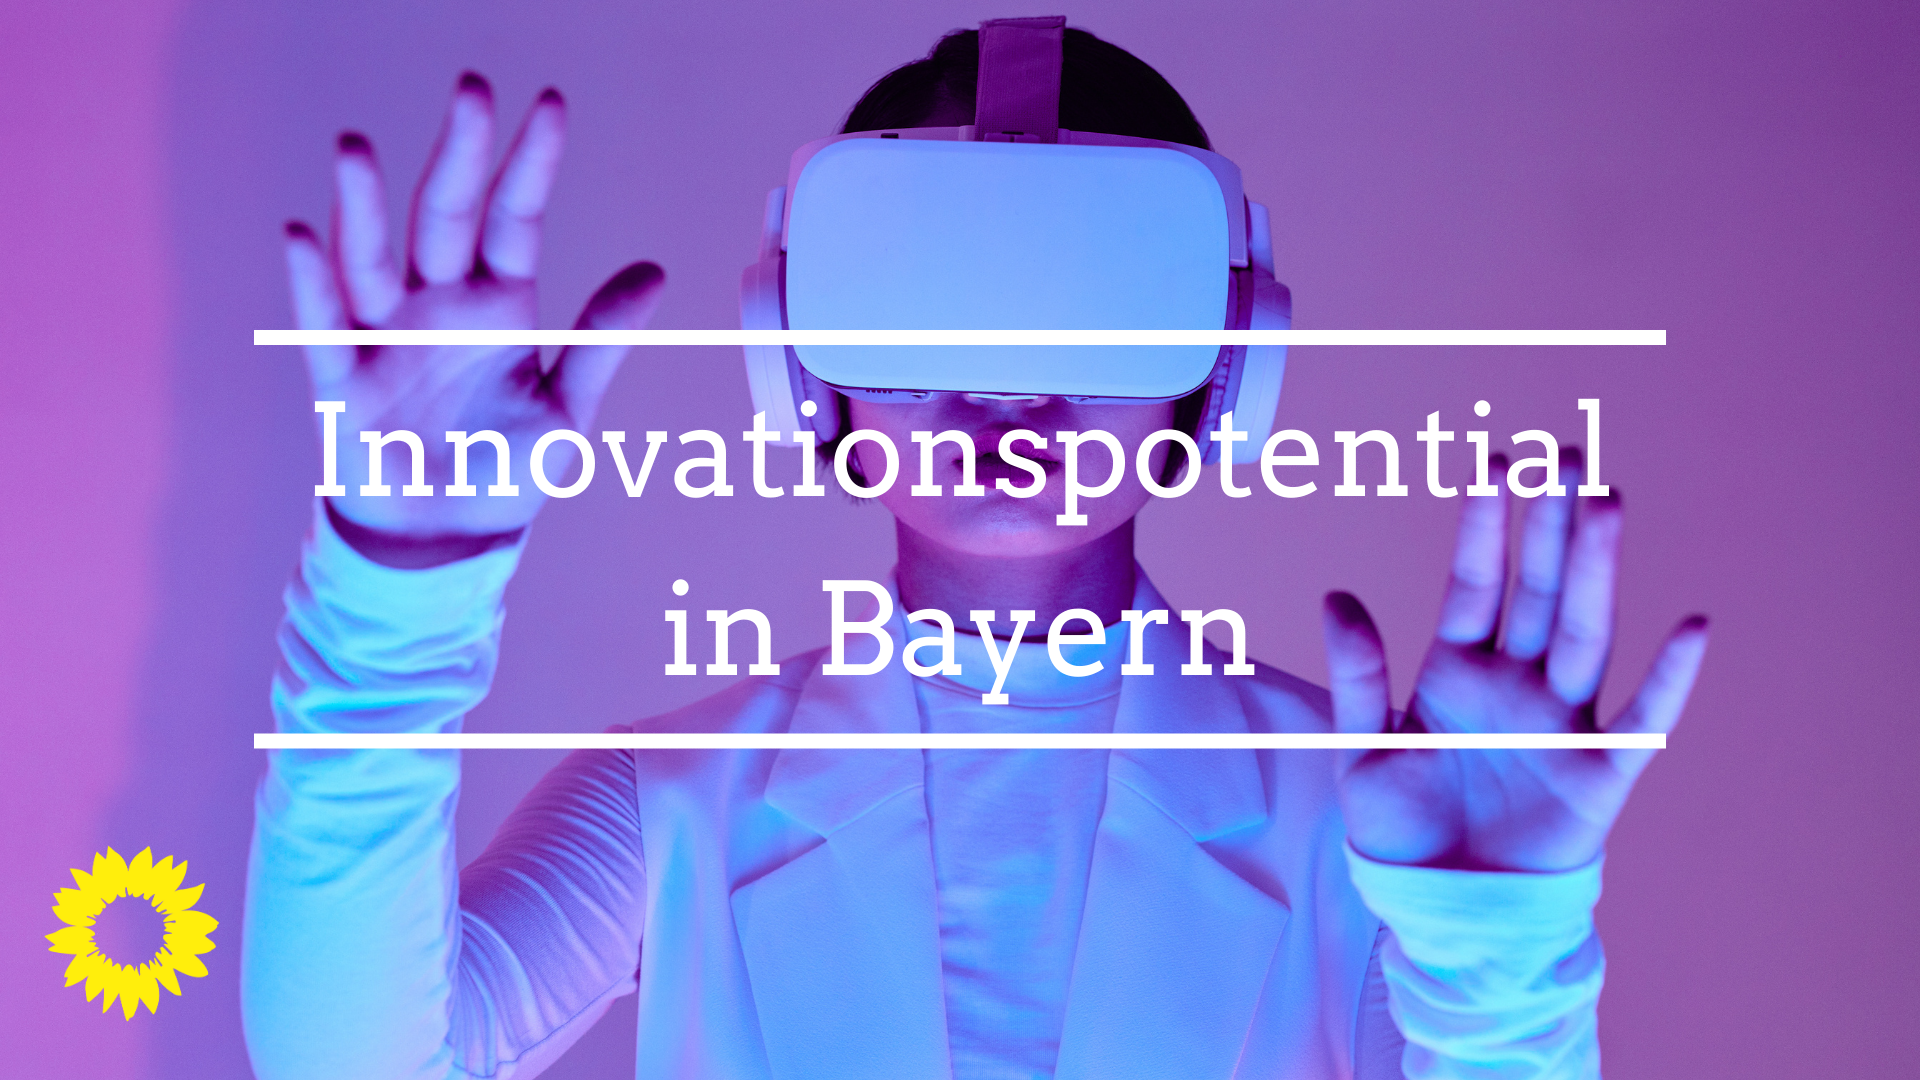 Innovationspotentiale in Bayern